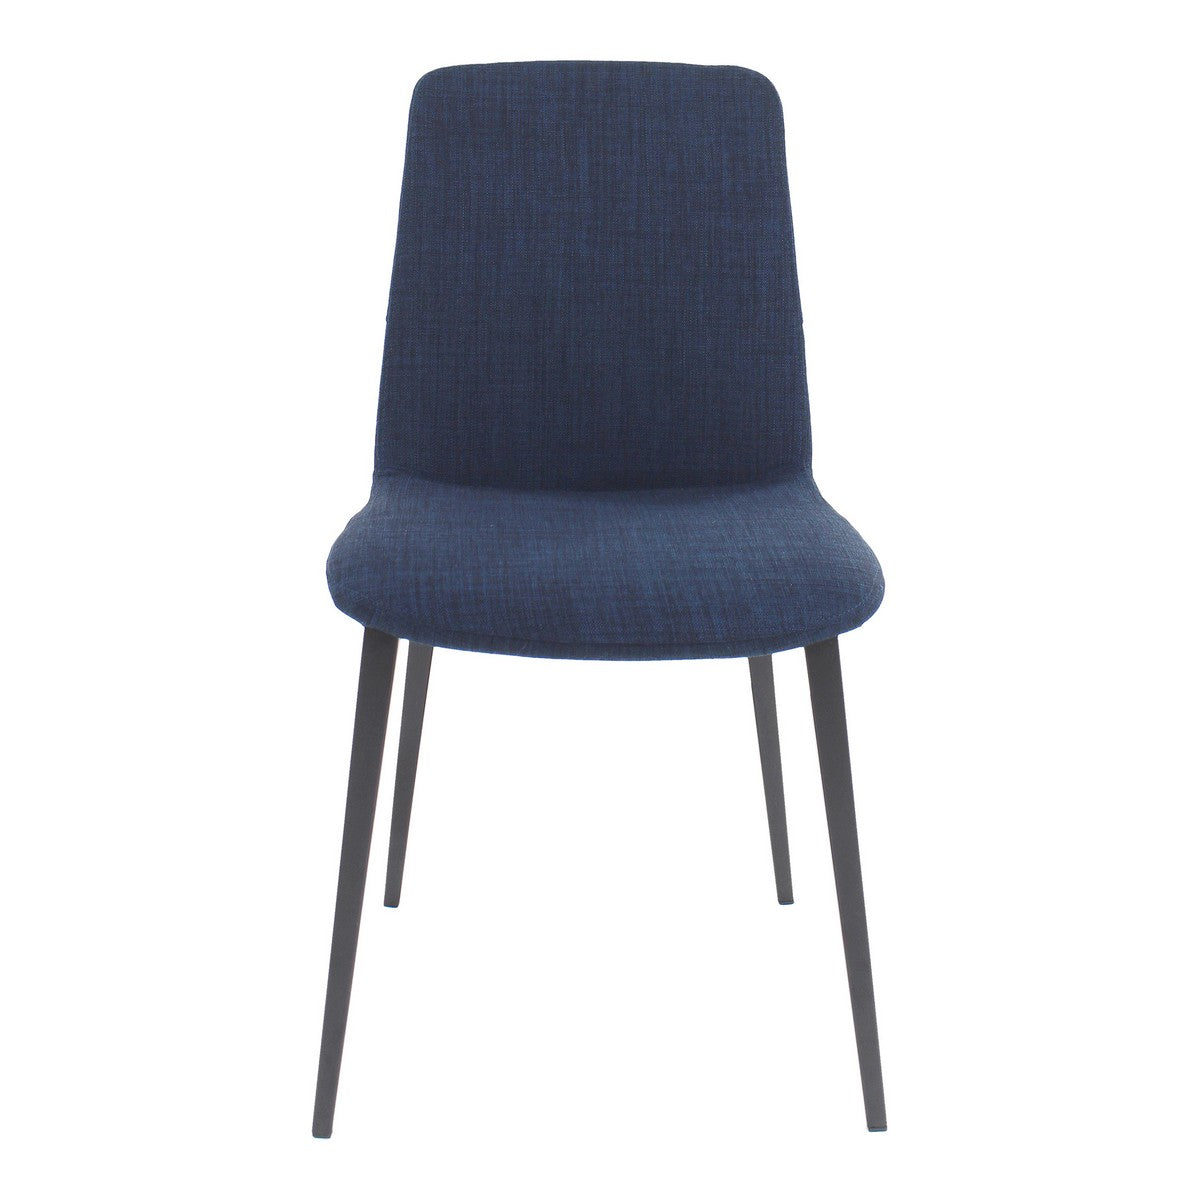 Moe's Home Collection Kito Dining Chair Blue-Set of Two - EJ-1017-26 - Moe's Home Collection - Dining Chairs - Minimal And Modern - 1